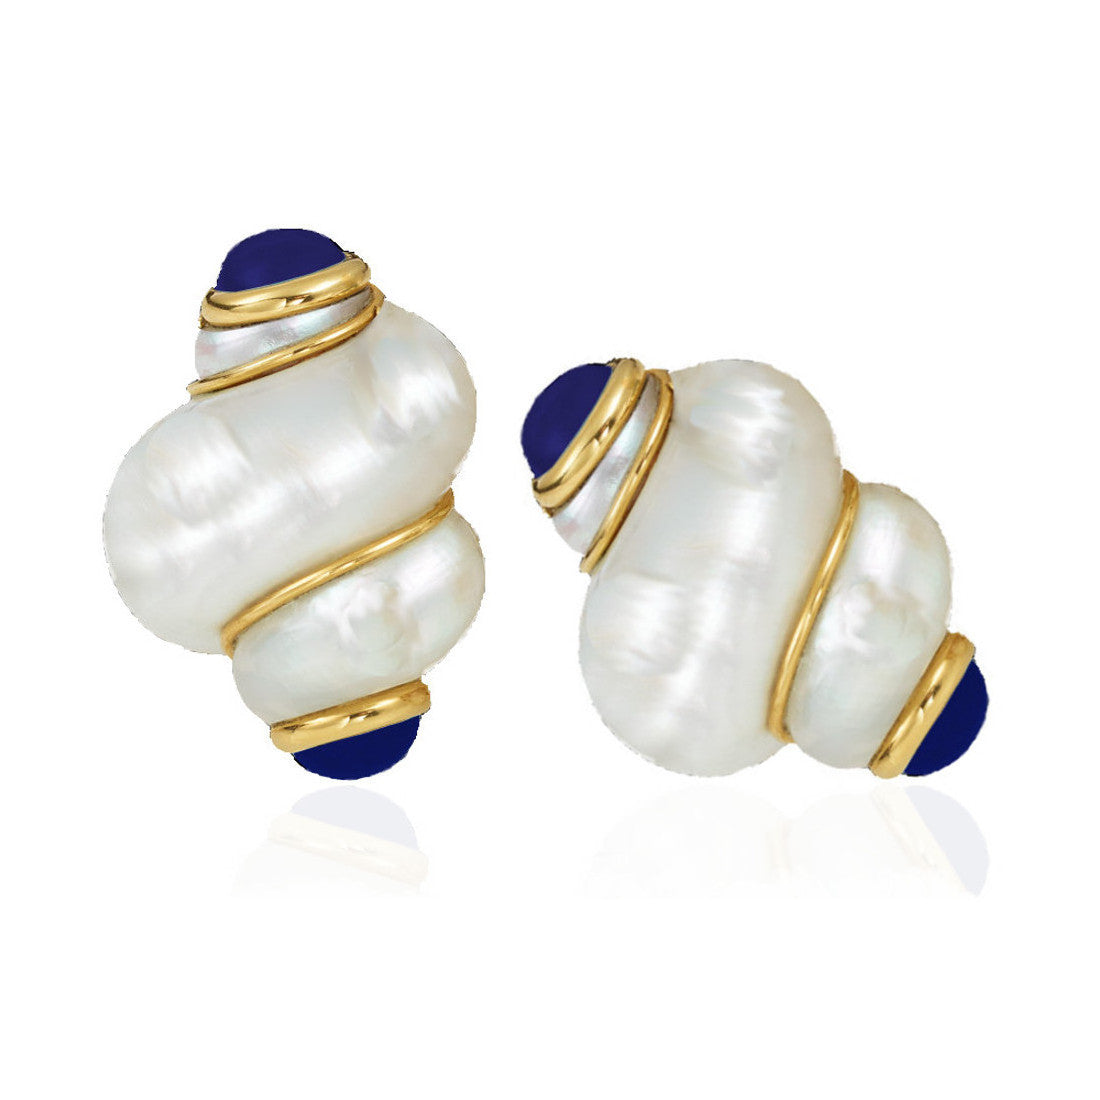 Shell and Cabochon Sapphire Earclips